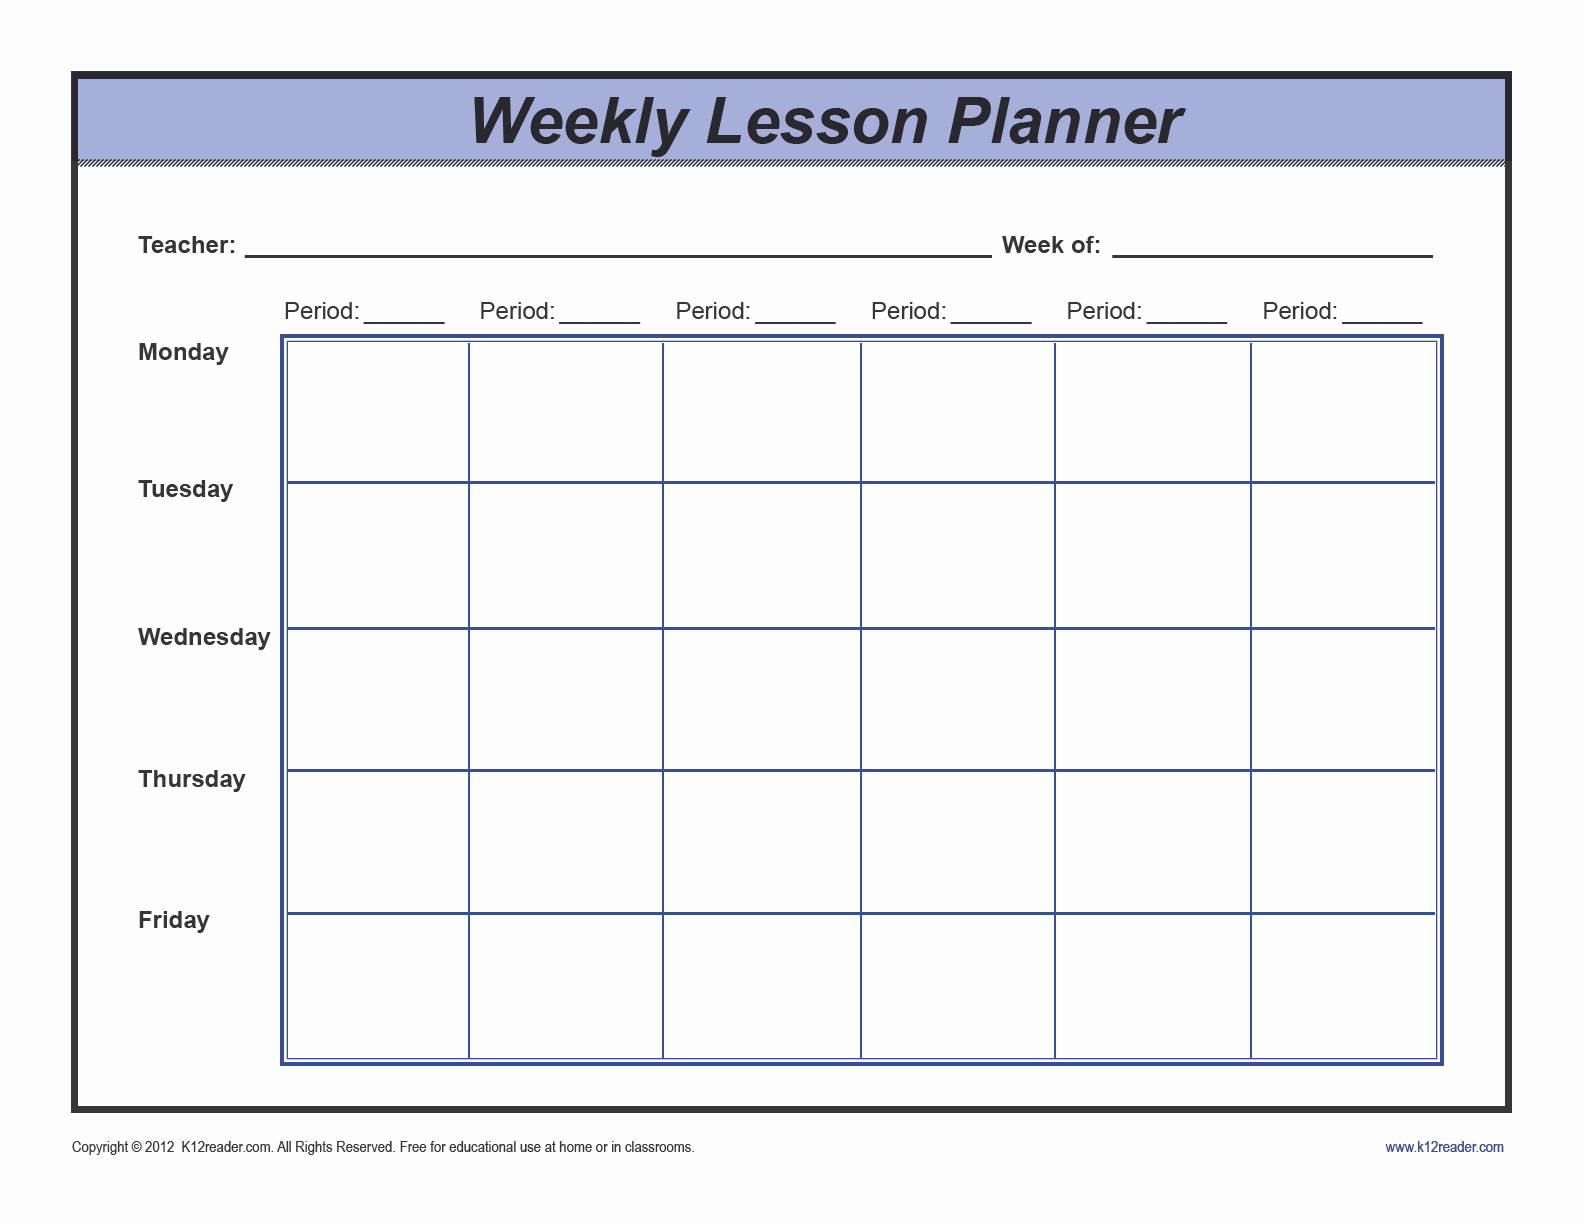 Weekly Lesson Plan Template Word Awesome Download Weekly Lesson Plan Template Preschool